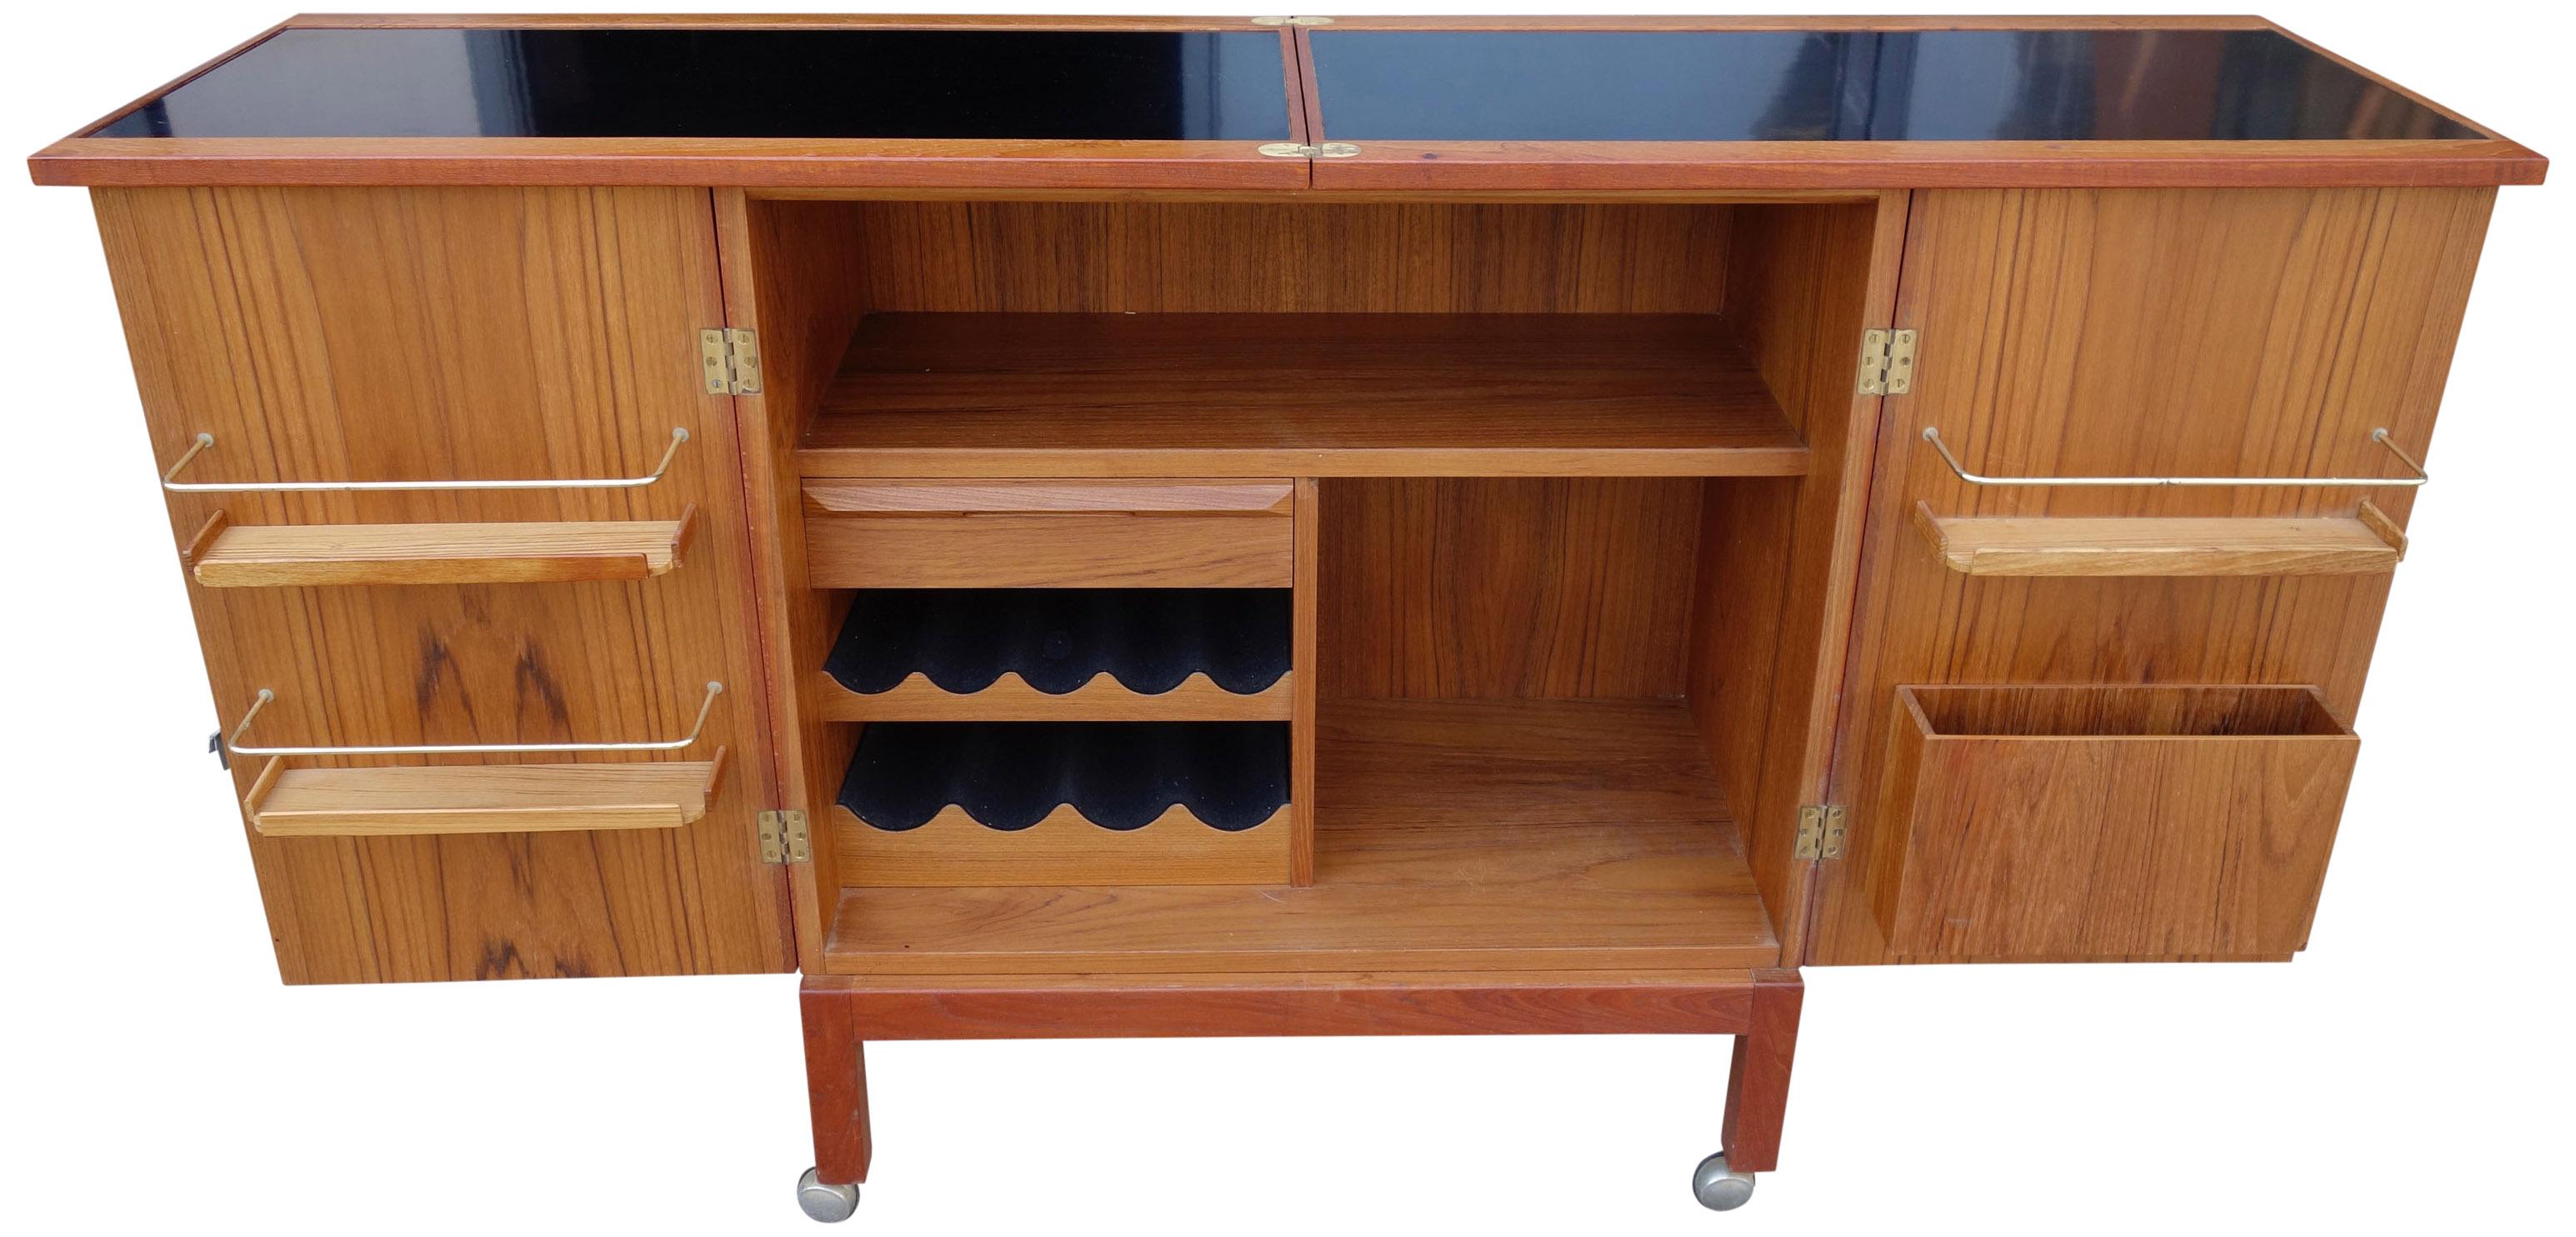 Scandinavian Modern at its best. Deceptively sleek and minimal on the outside but when opened and top extends revealing an amazingly crafted bar. This rolling teak bar cabinet features internal dovetailed drawers, wine storage and shelves with brass